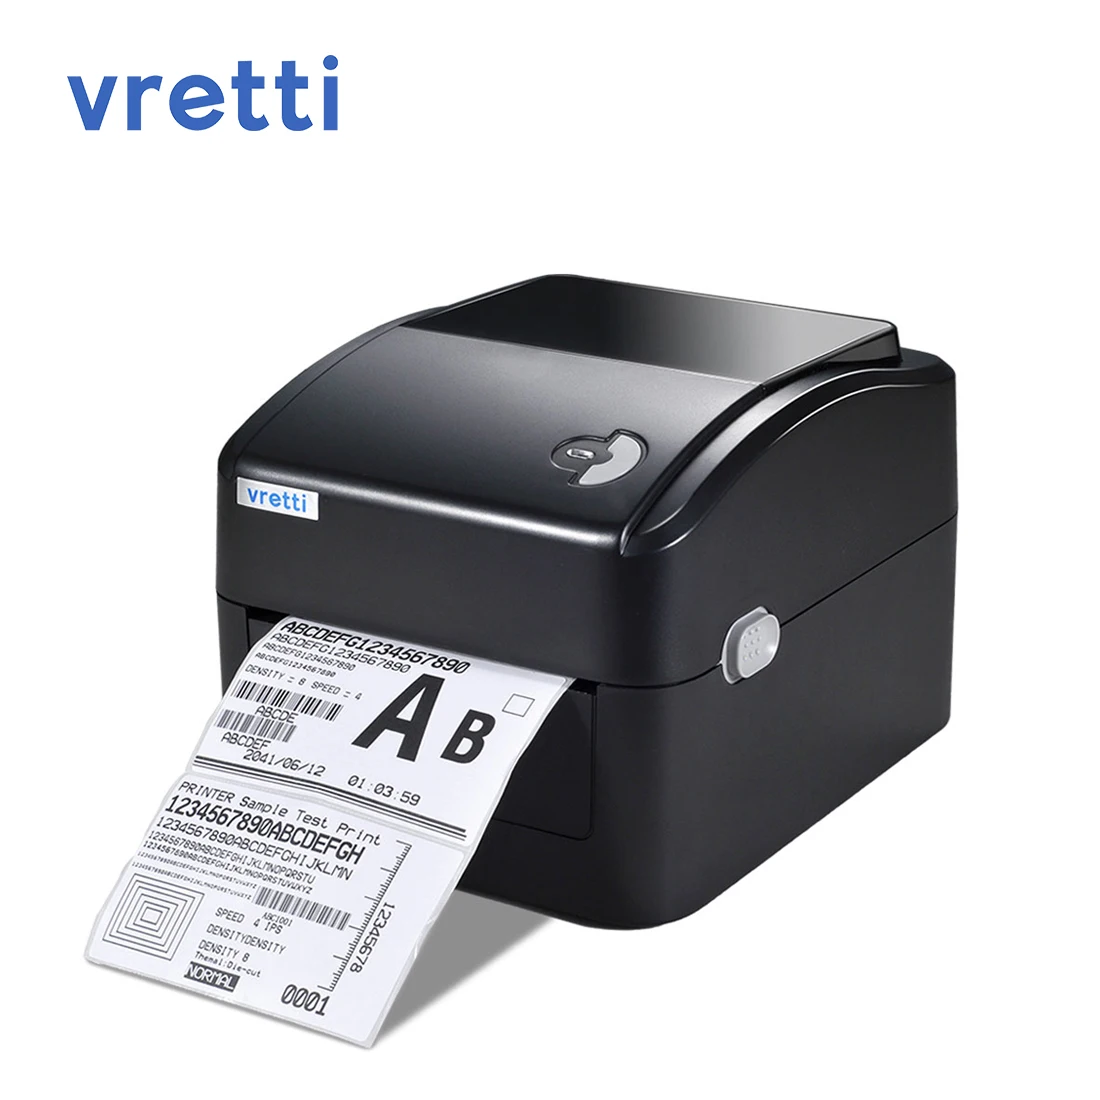 

4 inch shipping label printer support BT, wifi, computer usb connection